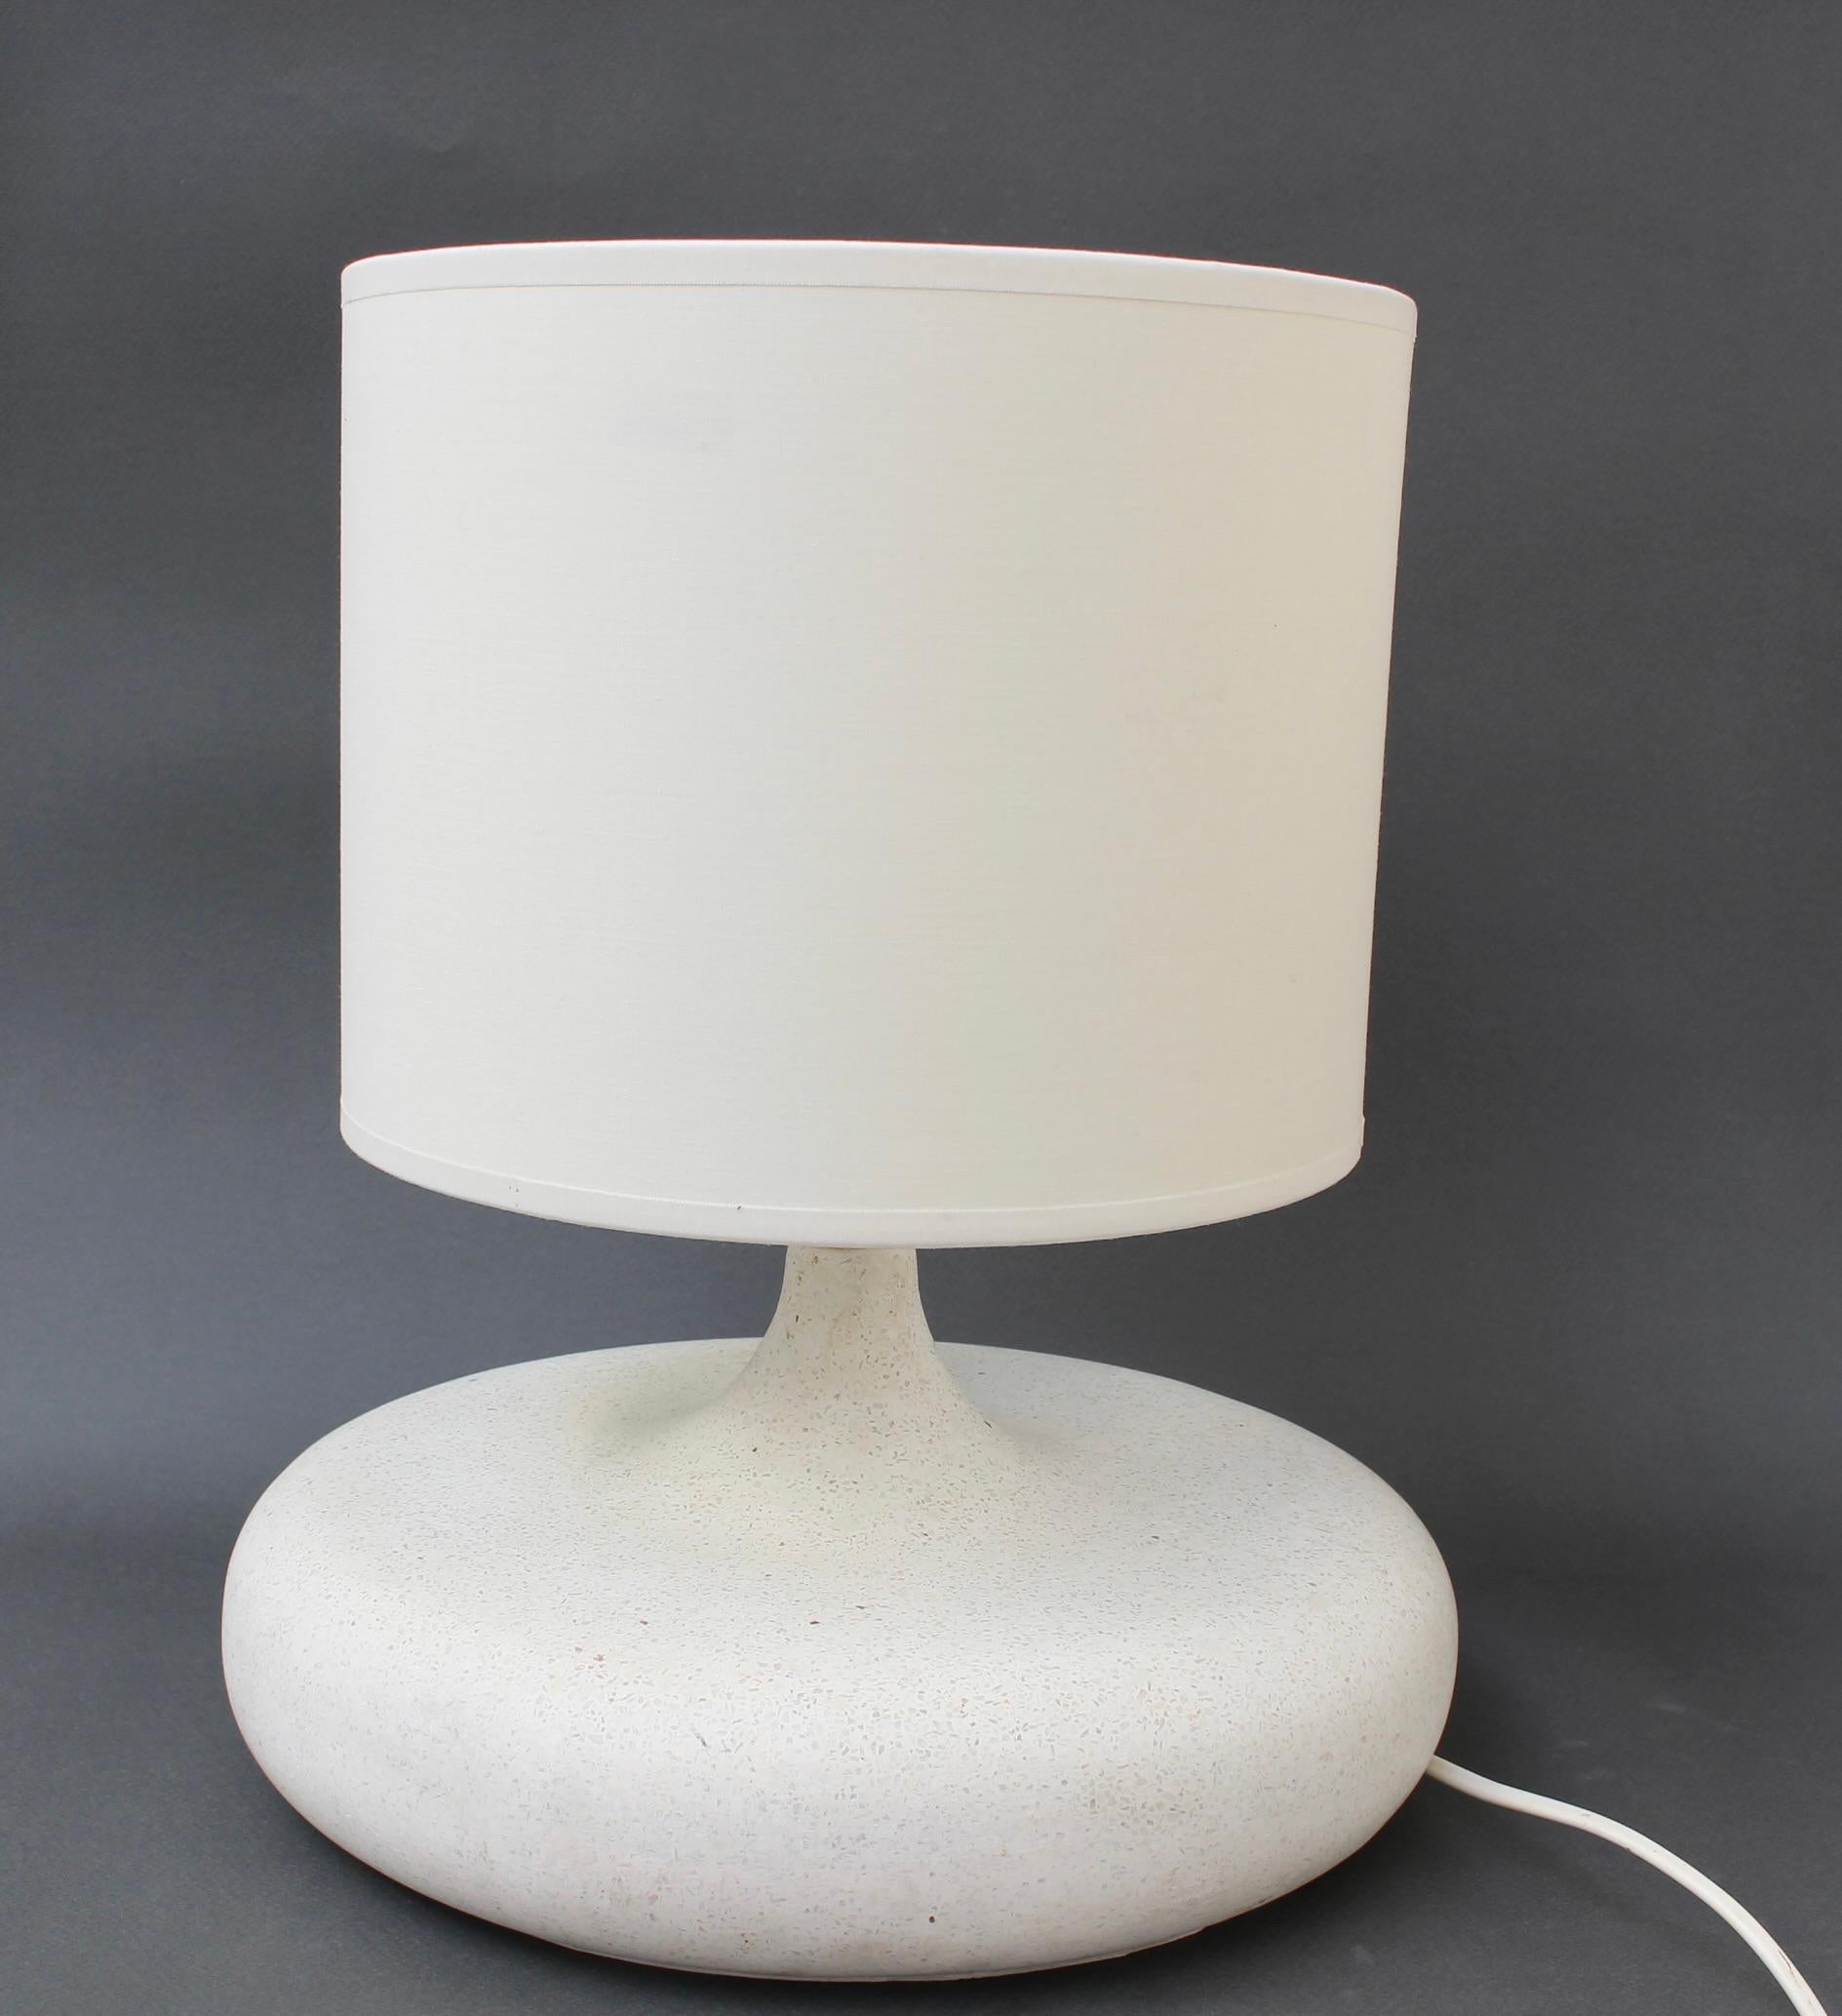 Vintage terrazzo flat stone table lamp by Habitat (circa 1990s). Very weighty, visually alluring and tactile all at once, this vintage Habitat lamp made for the French market brings a smile to your face (Habitat opened in France in 1973). Currently